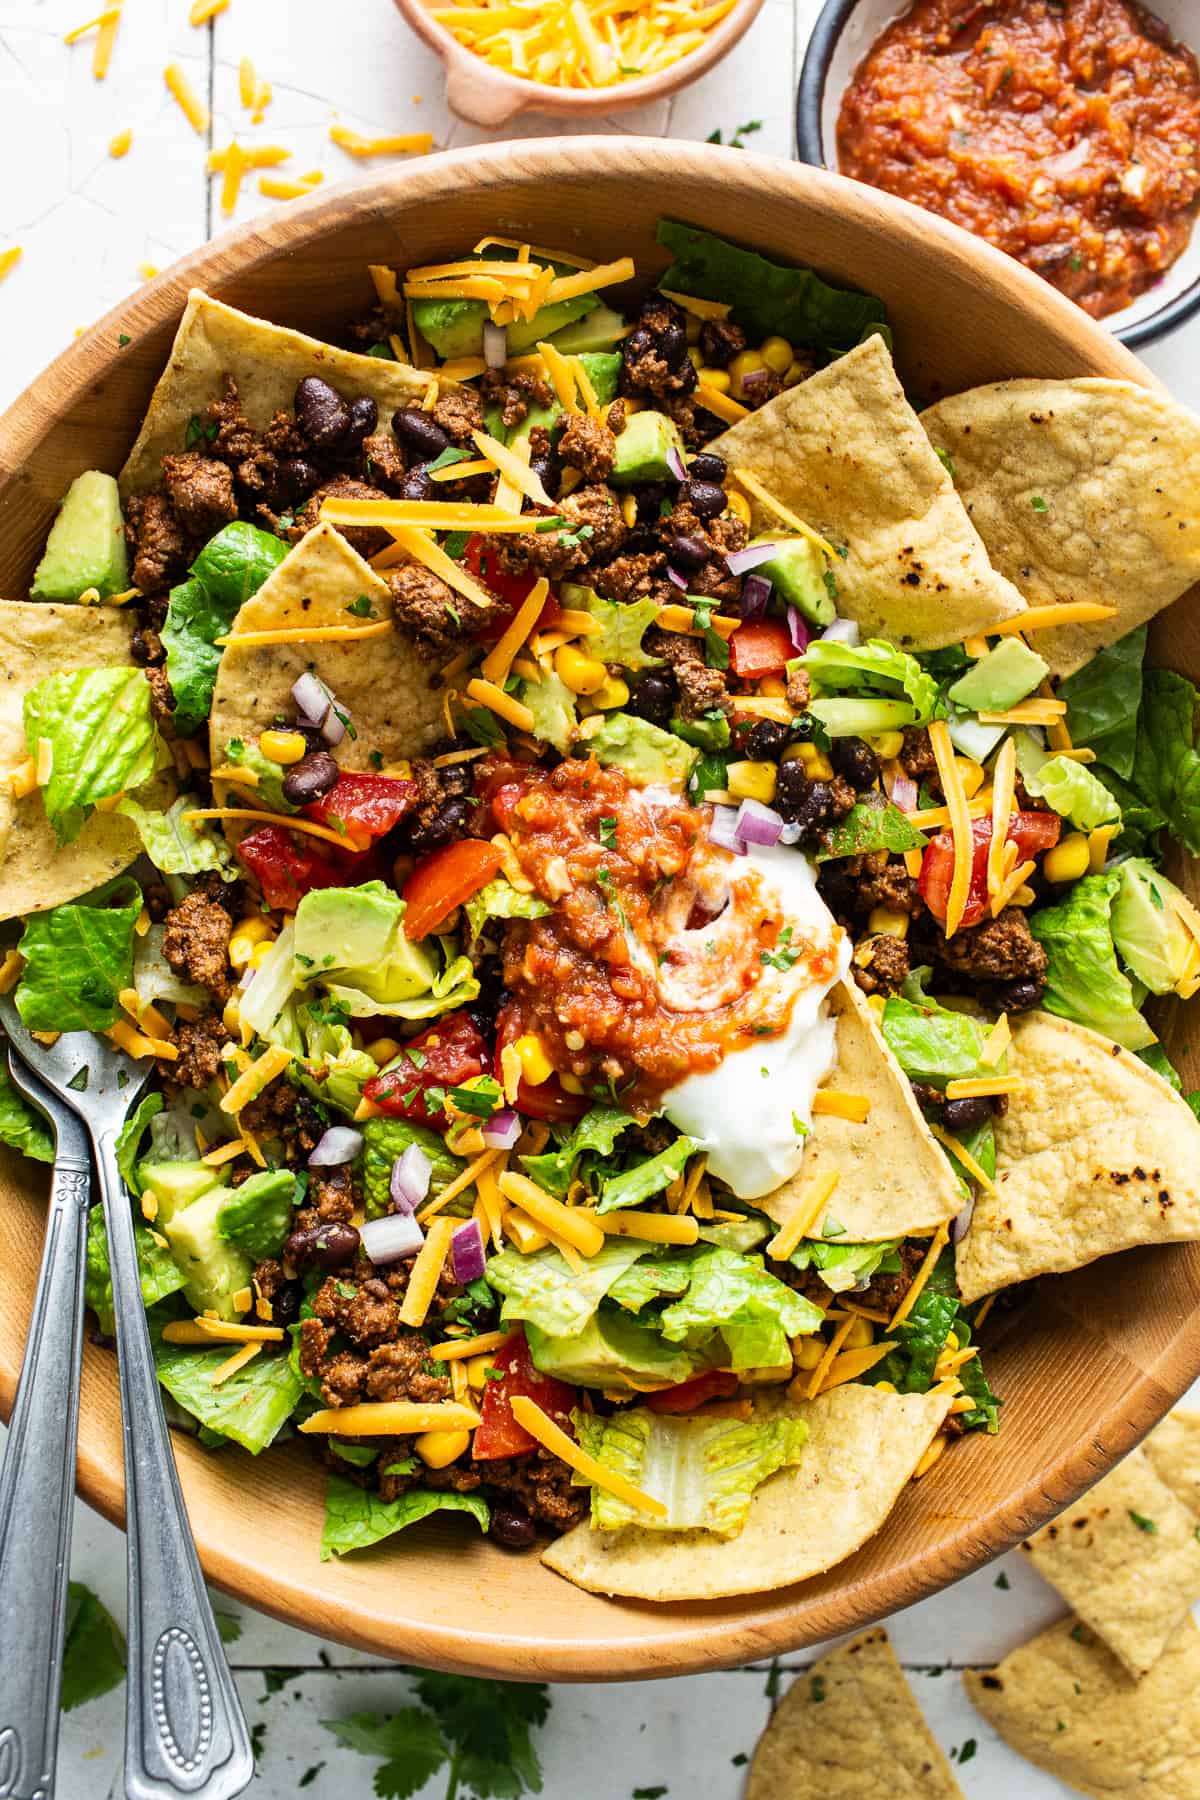 A big bowl of taco salad with ground beef, cheese, lettuce, beans, sour cream, salsa, and tortilla chips.